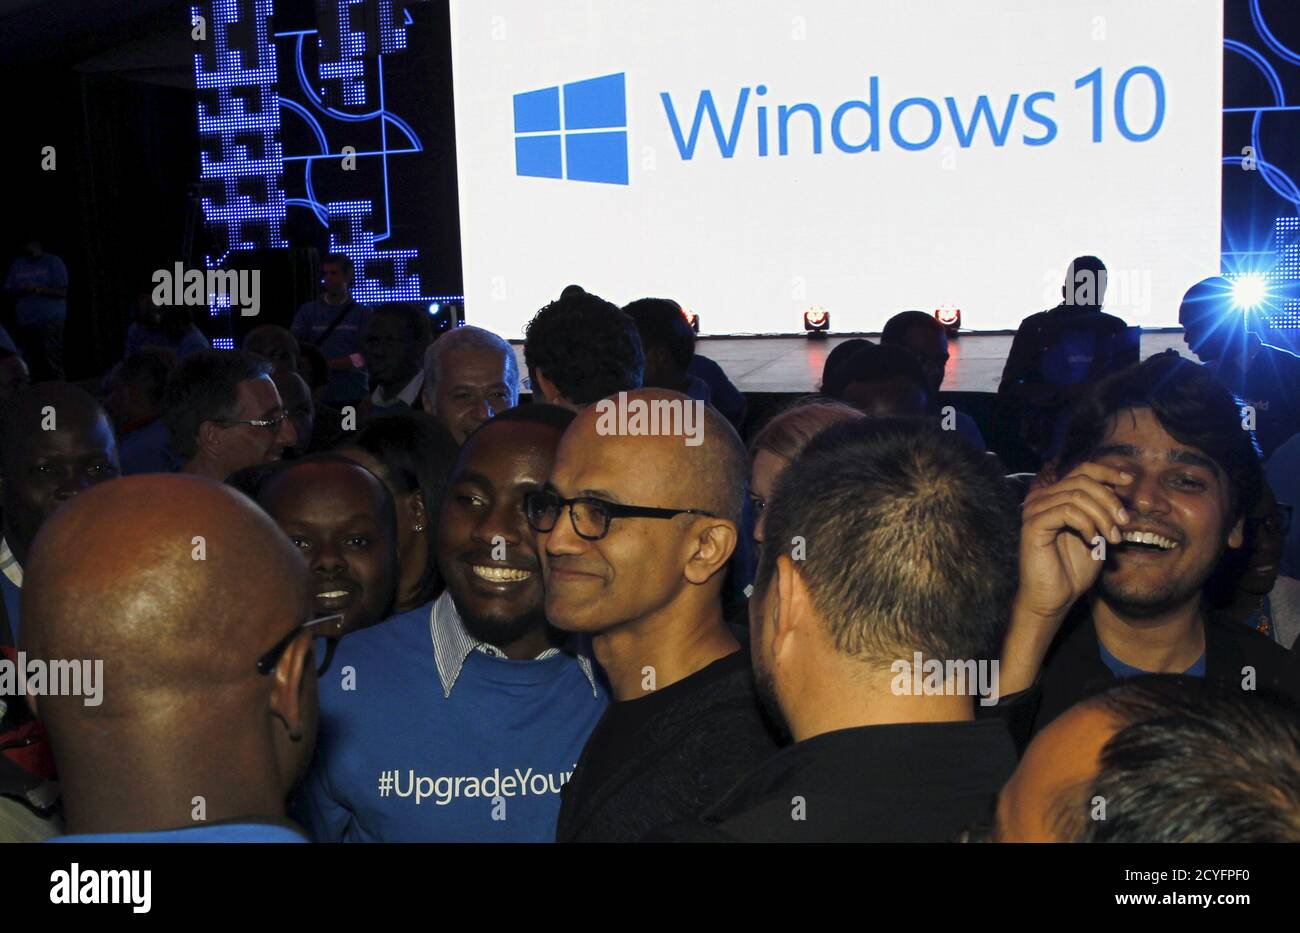 Microsoft CEO Satya Nadella (C) takes photographs with delegates after the launch of the Windows 10 operating system in Kenya's capital Nairobi, July 29, 2015. Microsoft Corp's launch of its first new operating system in almost three years, designed to work across laptops, desktop and smartphones, won mostly positive reviews for its user-friendly and feature-packed interface. REUTERS/Thomas Mukoya Stock Photo